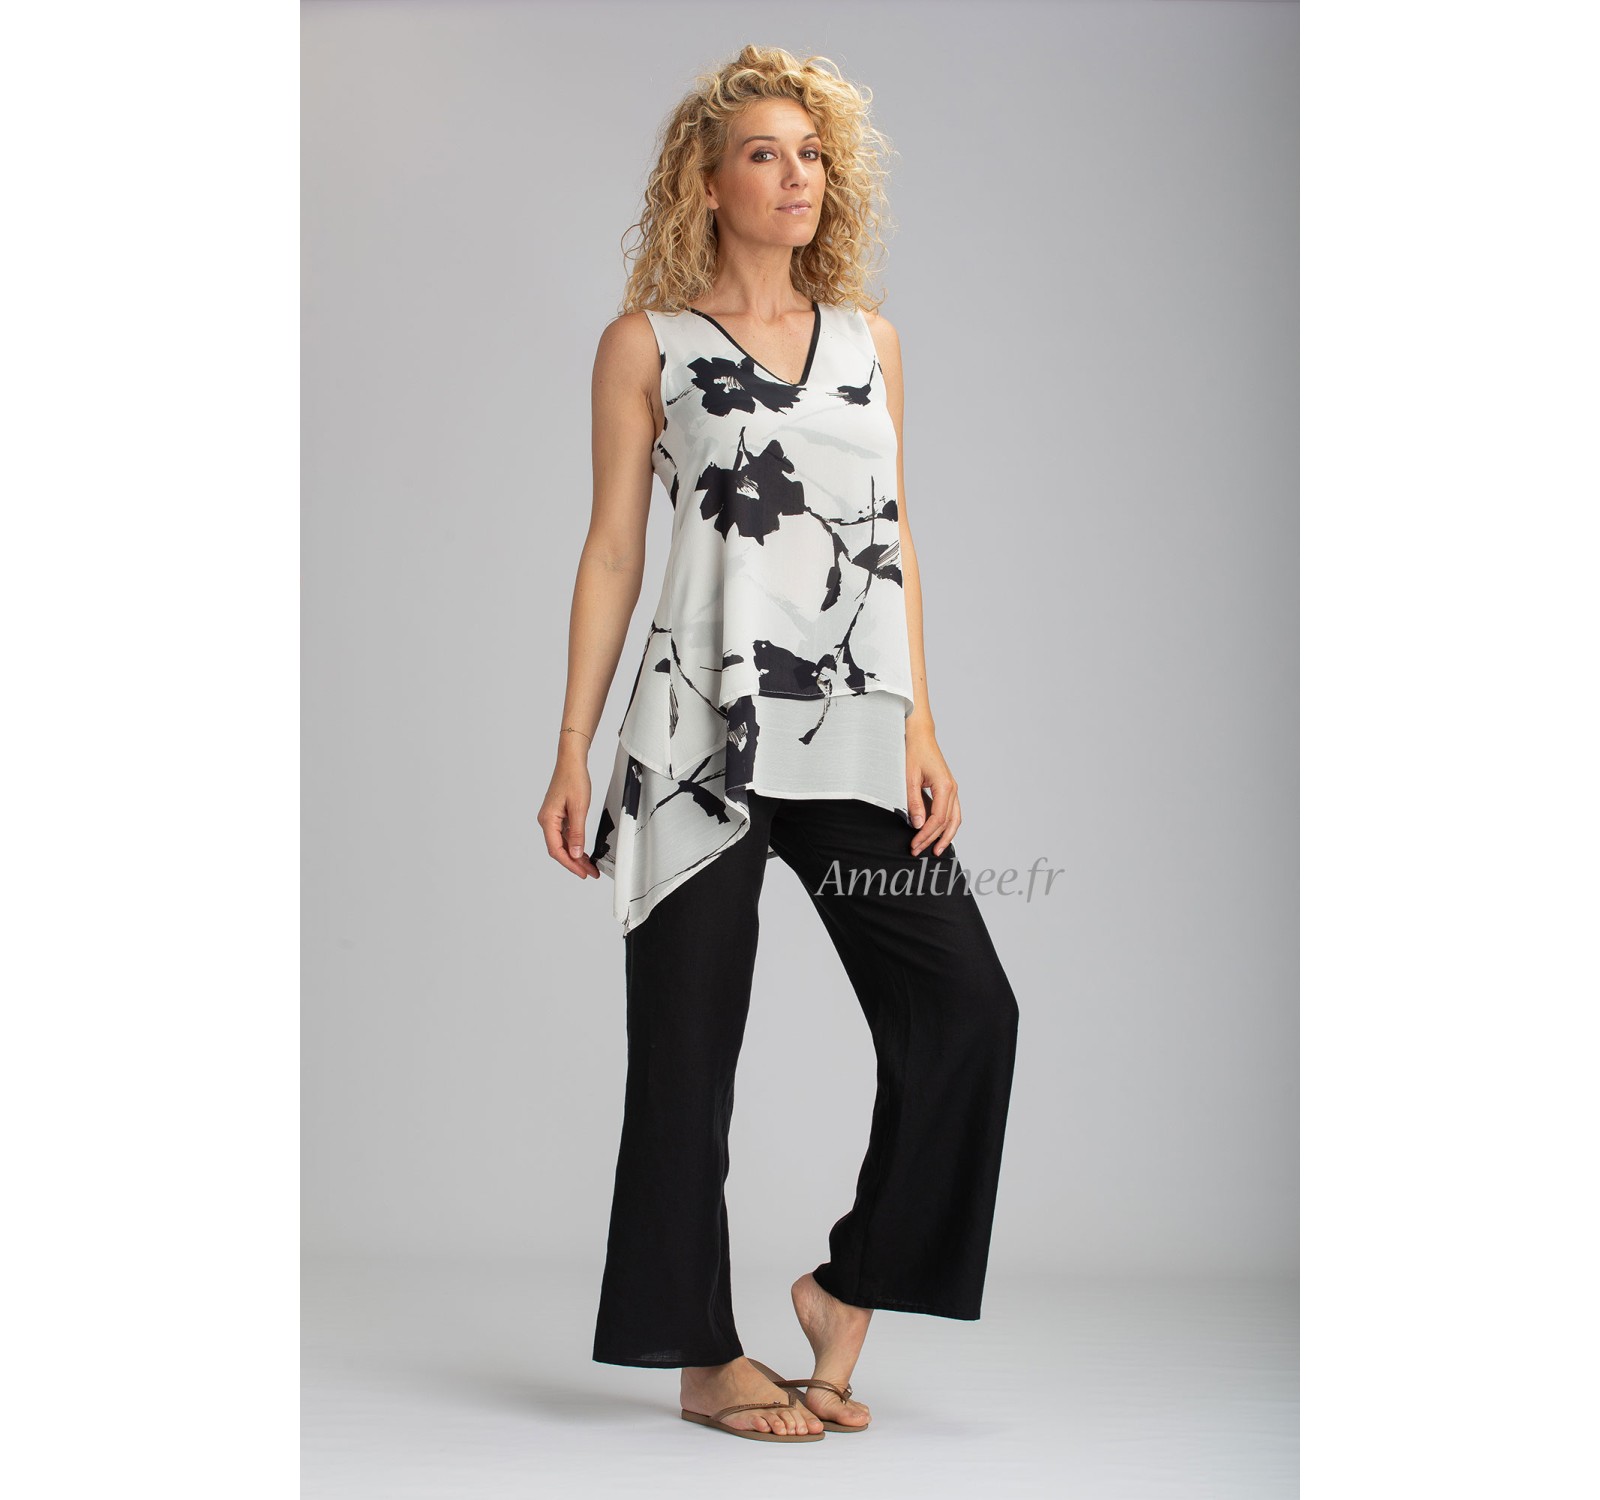 TRAPEZE TOP WITH FLORAL PRINTS AND BABA STRAIGHT PANTS IN BLACK LINEN